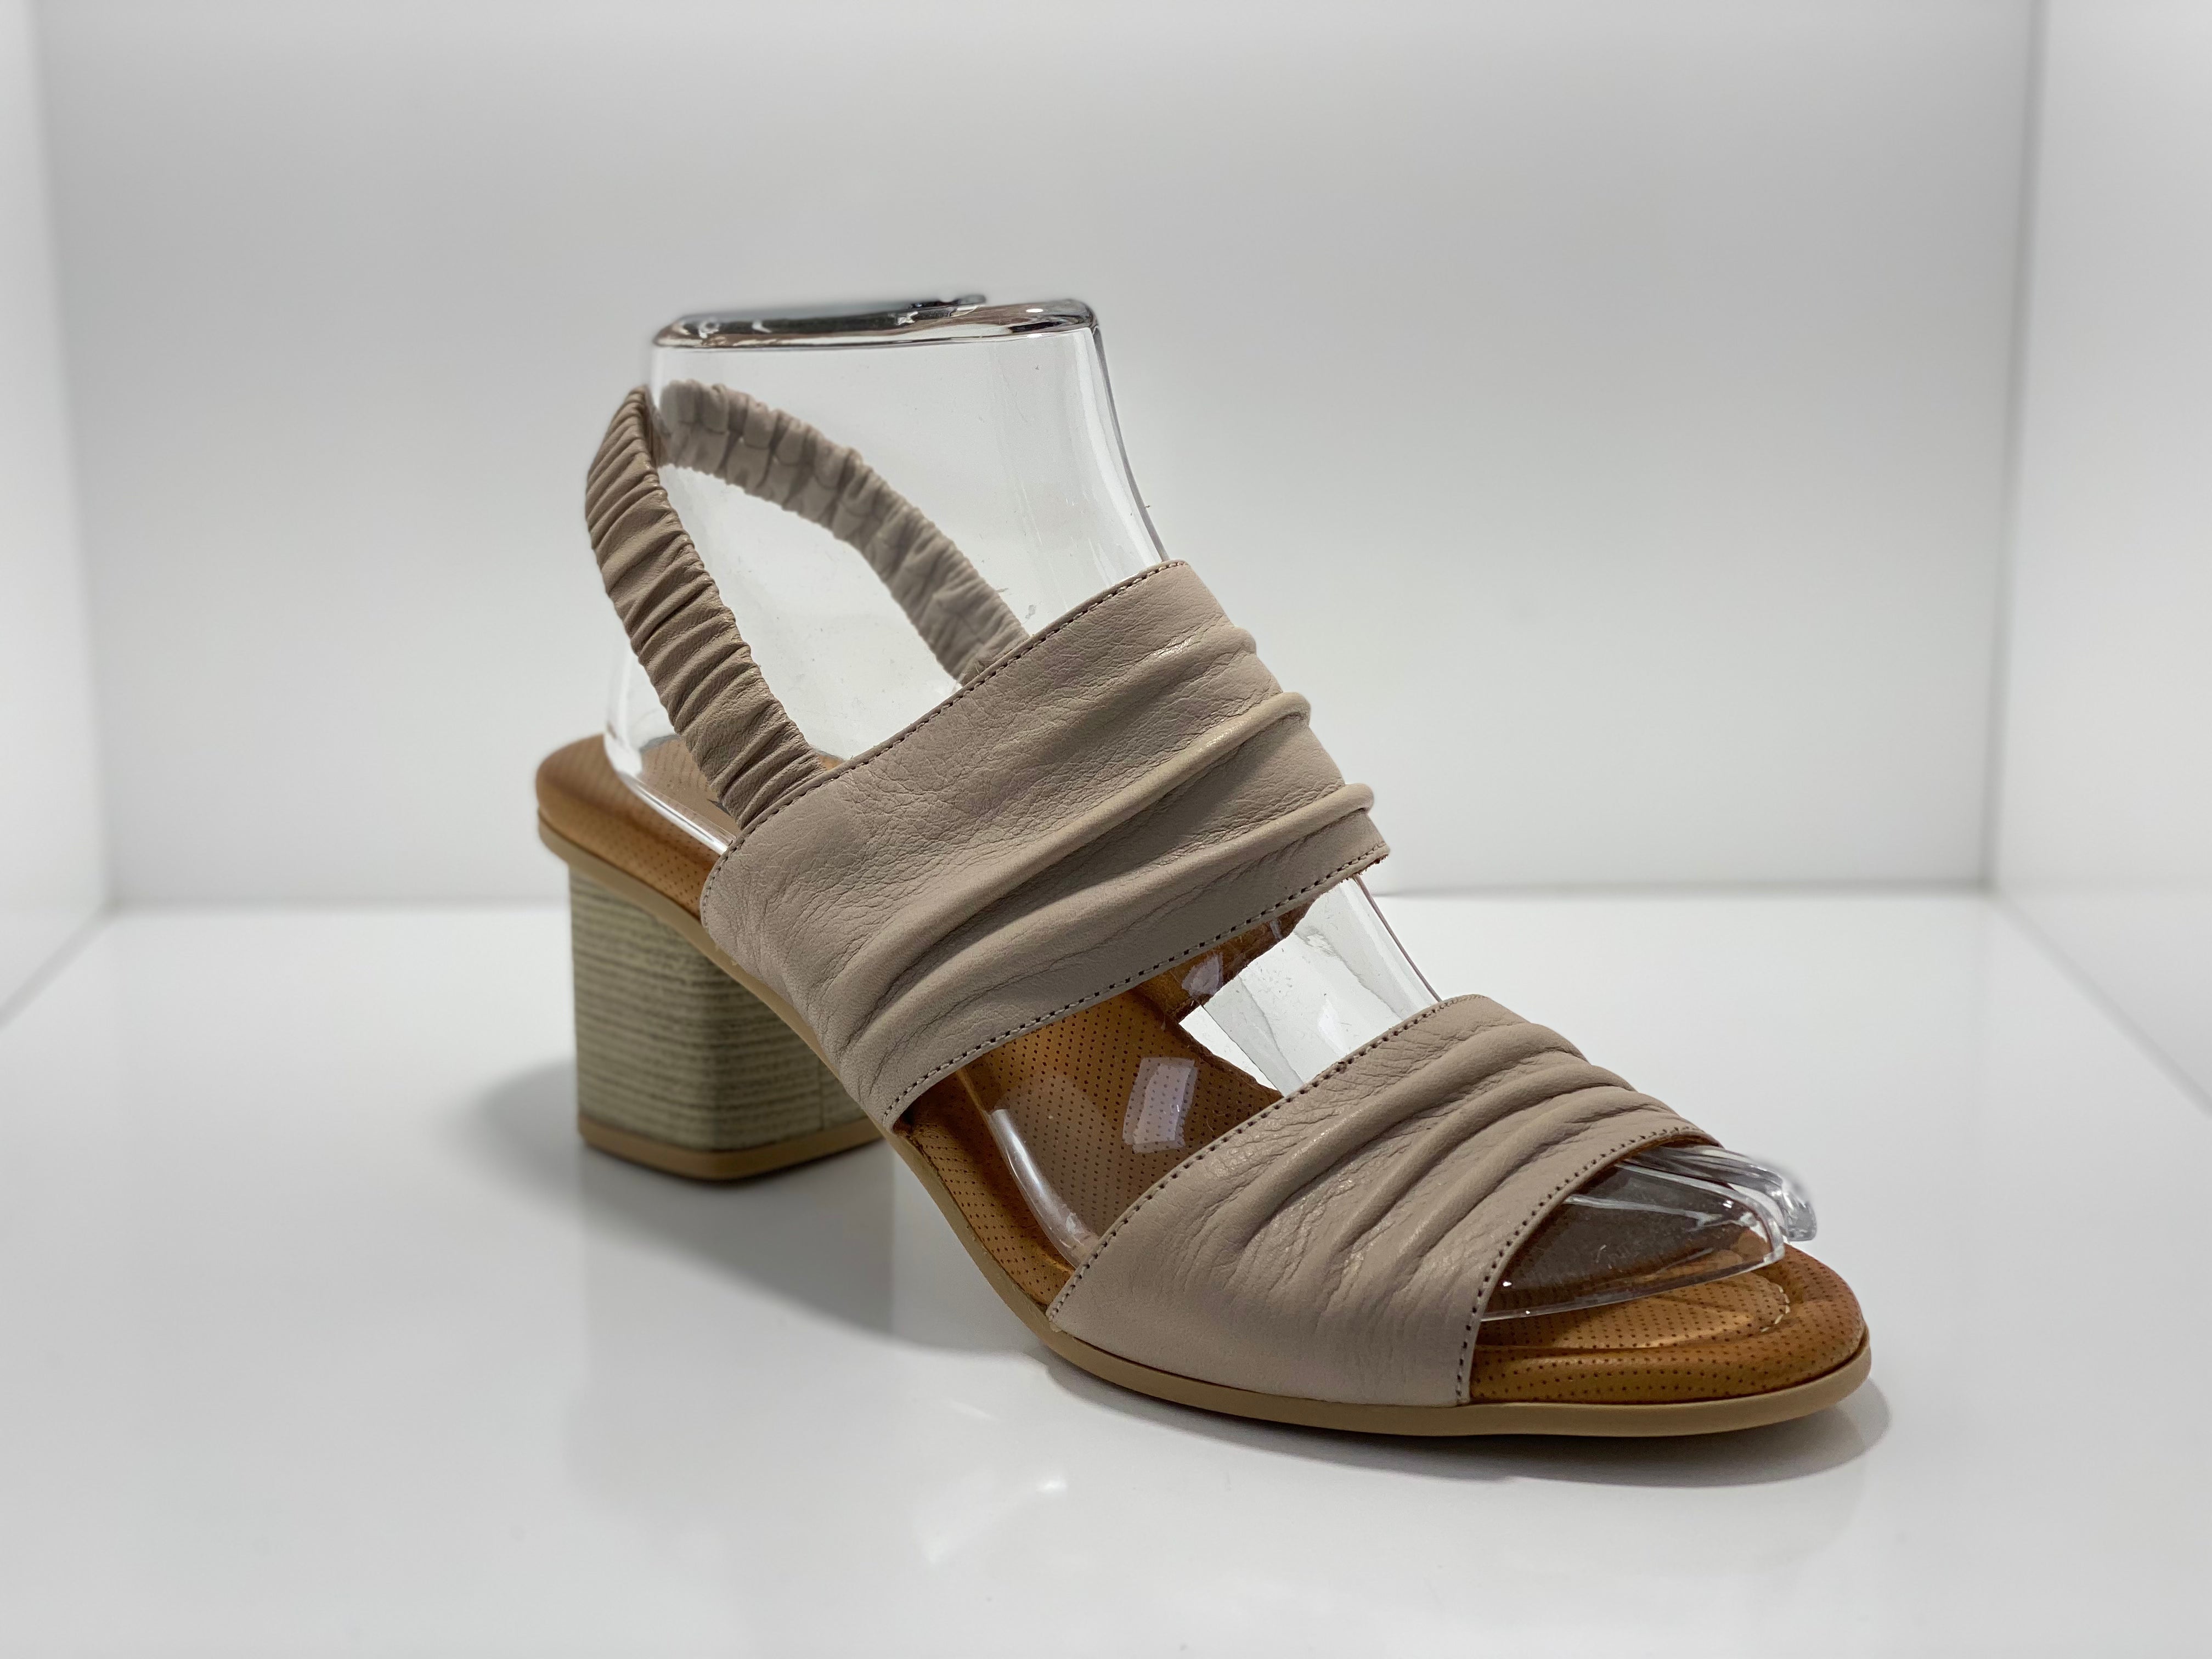 Presley Twin Strap with Ruching - Leather Sandal